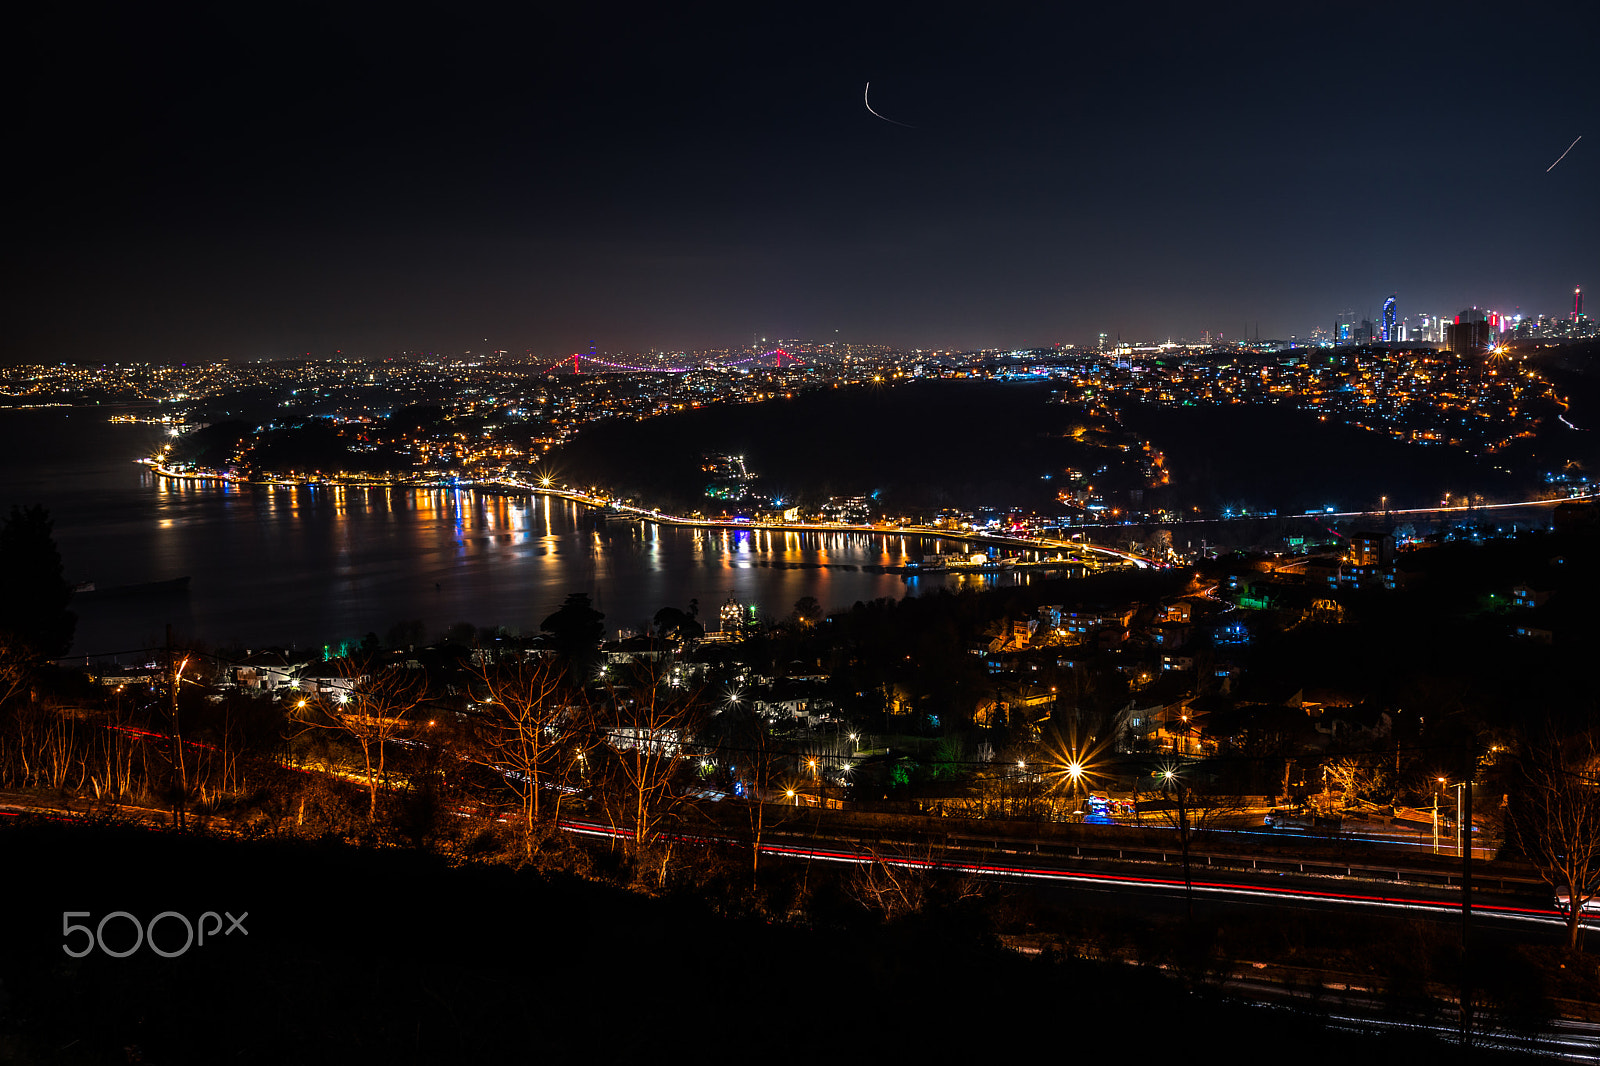 Sony a6000 sample photo. Istanbul / sariyer at night with a bit of bosporus photography